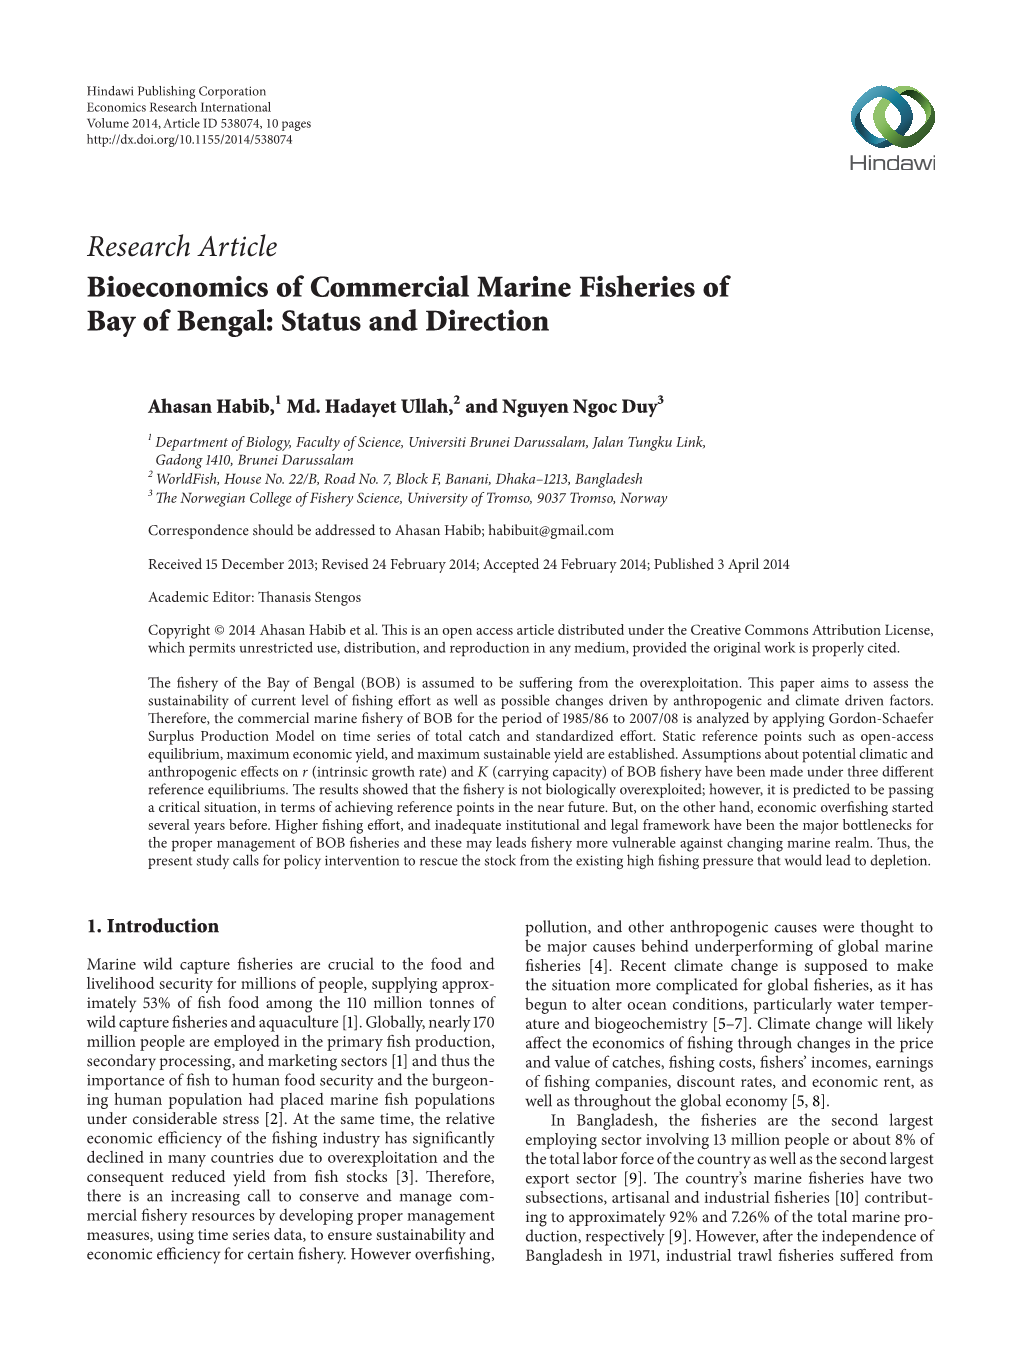 Bioeconomics of Commercial Marine Fisheries of Bay of Bengal: Status and Direction